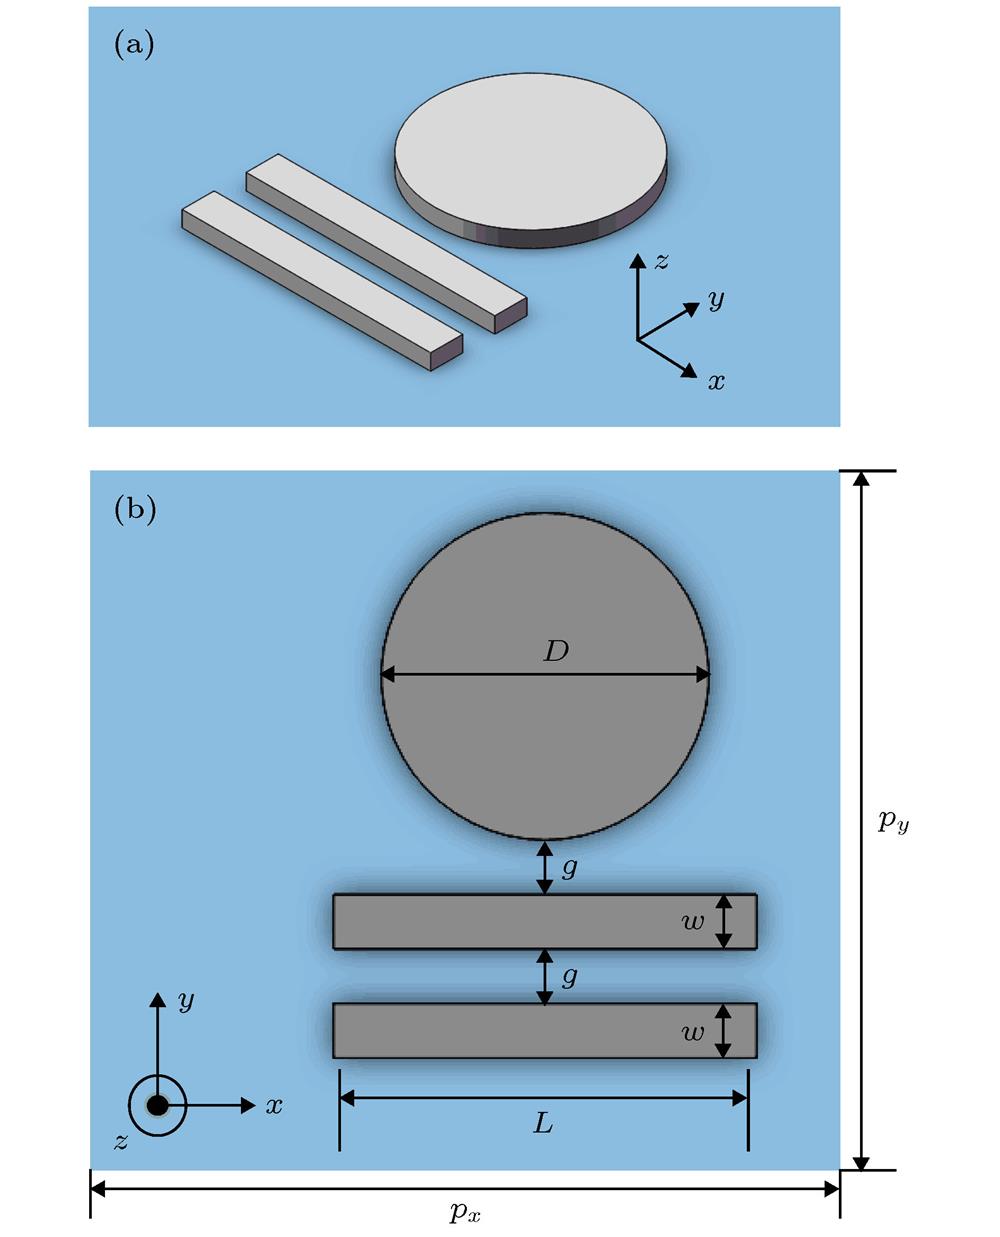 Schematic diagrams of dual-band PIT model: (a) Three-dimensional space schematic; (b) two-dimensional plane schematic.